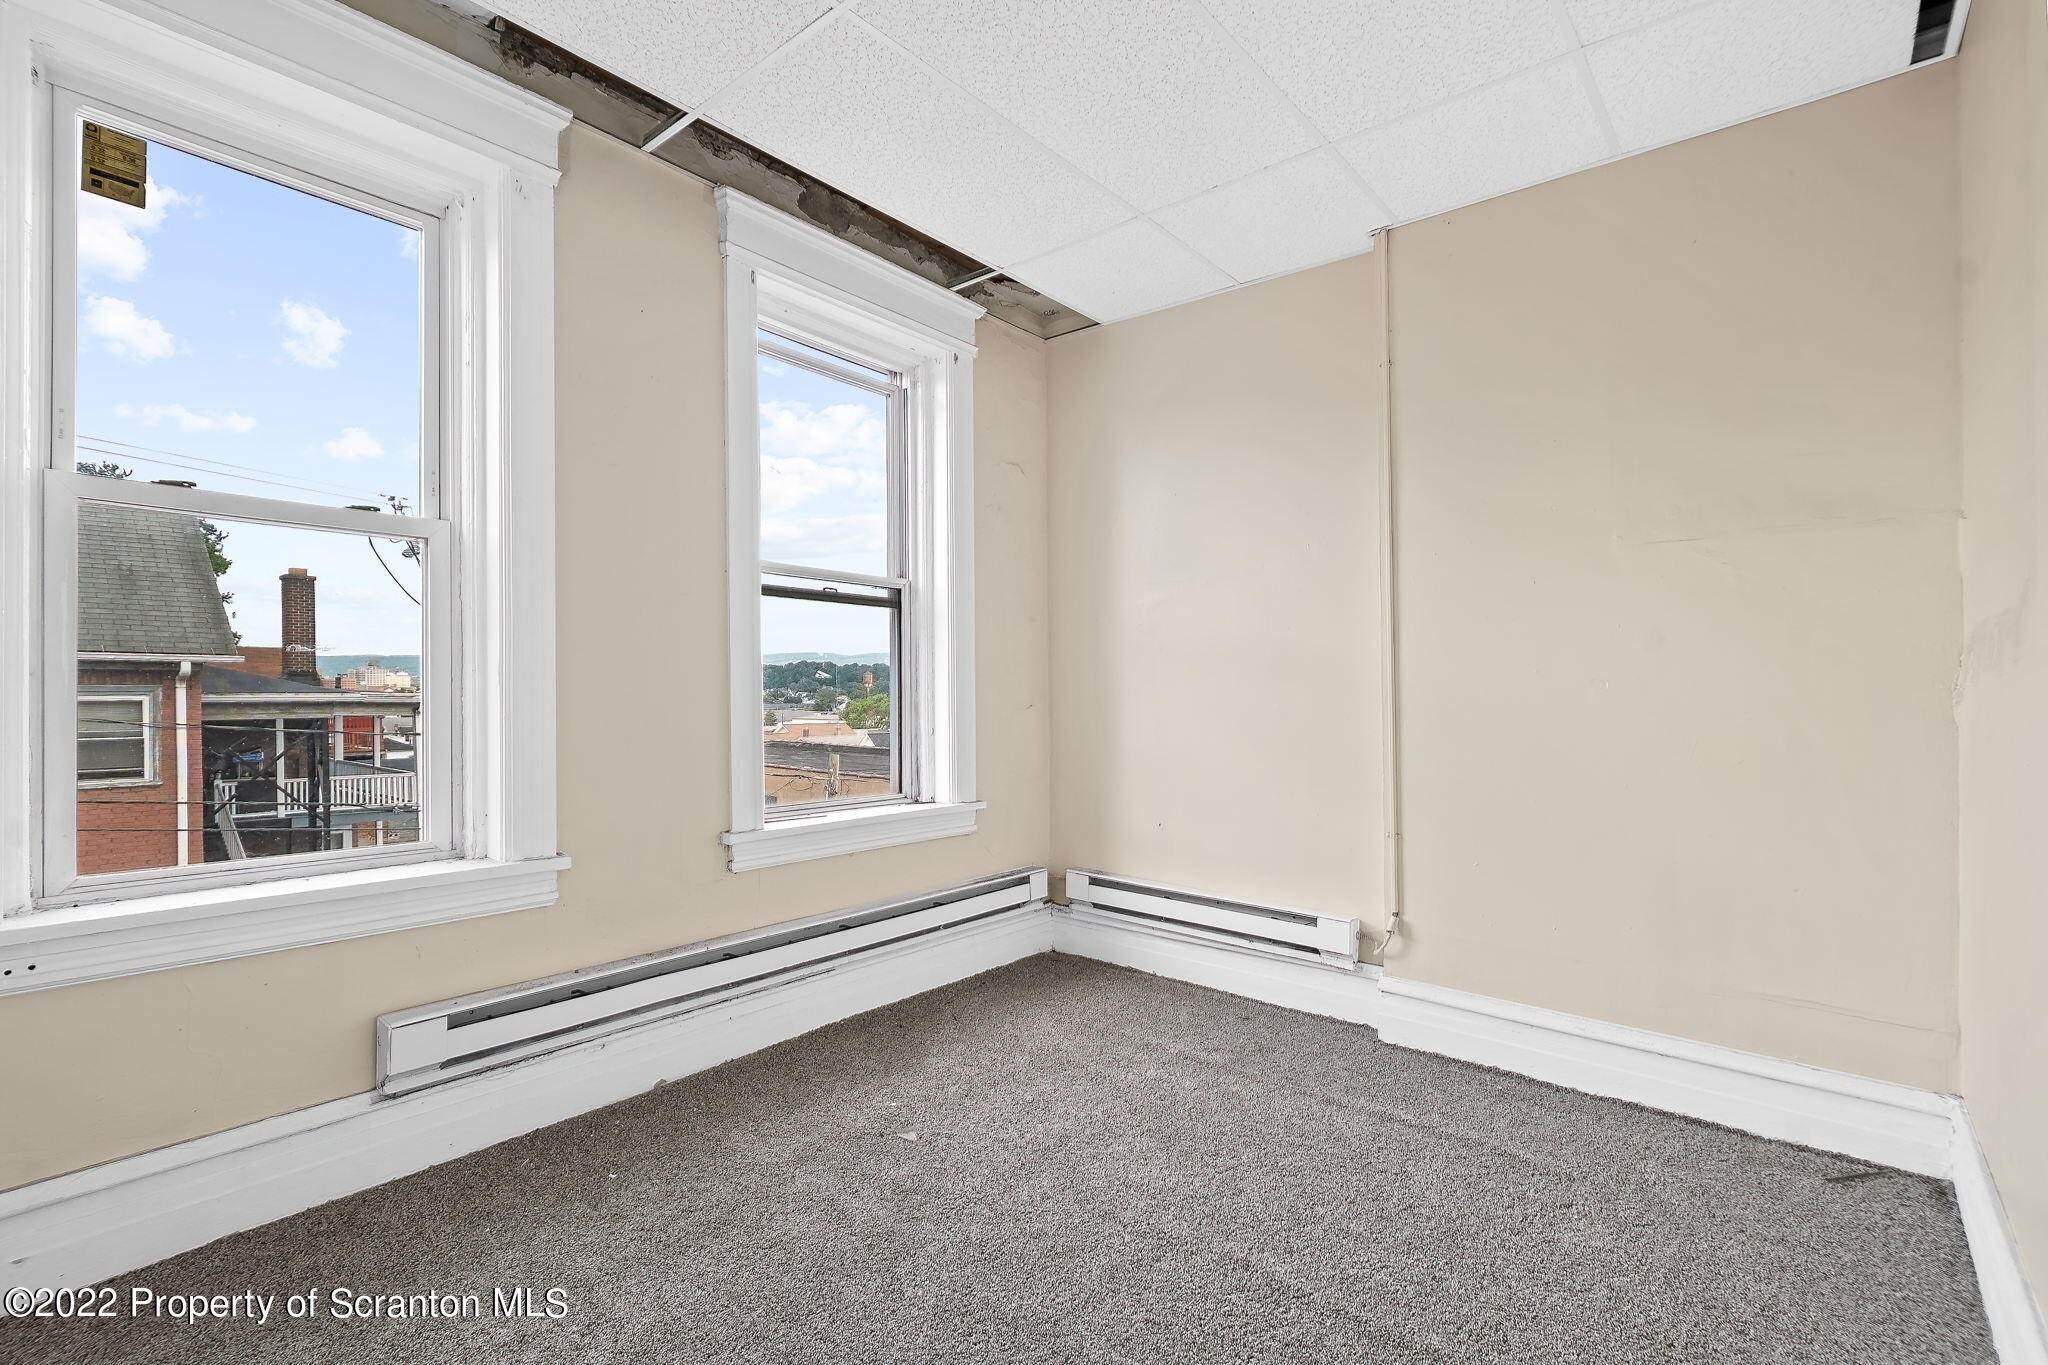 60. Commercial for Sale at 380 Scott Street Wilkes Barre, Pennsylvania 18702 United States